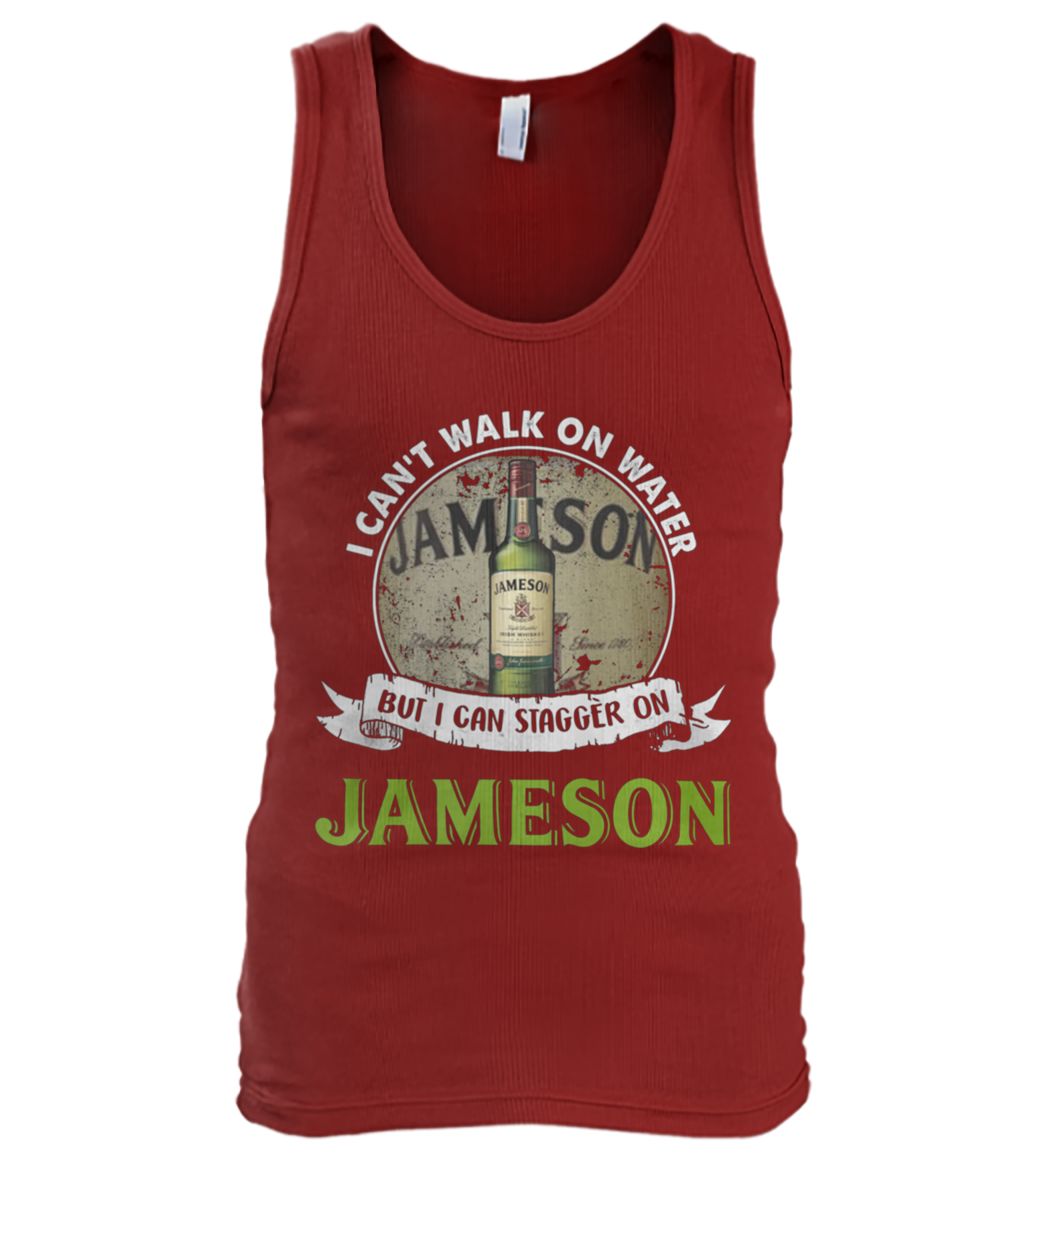 I can't walk on water but I can stagger on jameson men's tank top